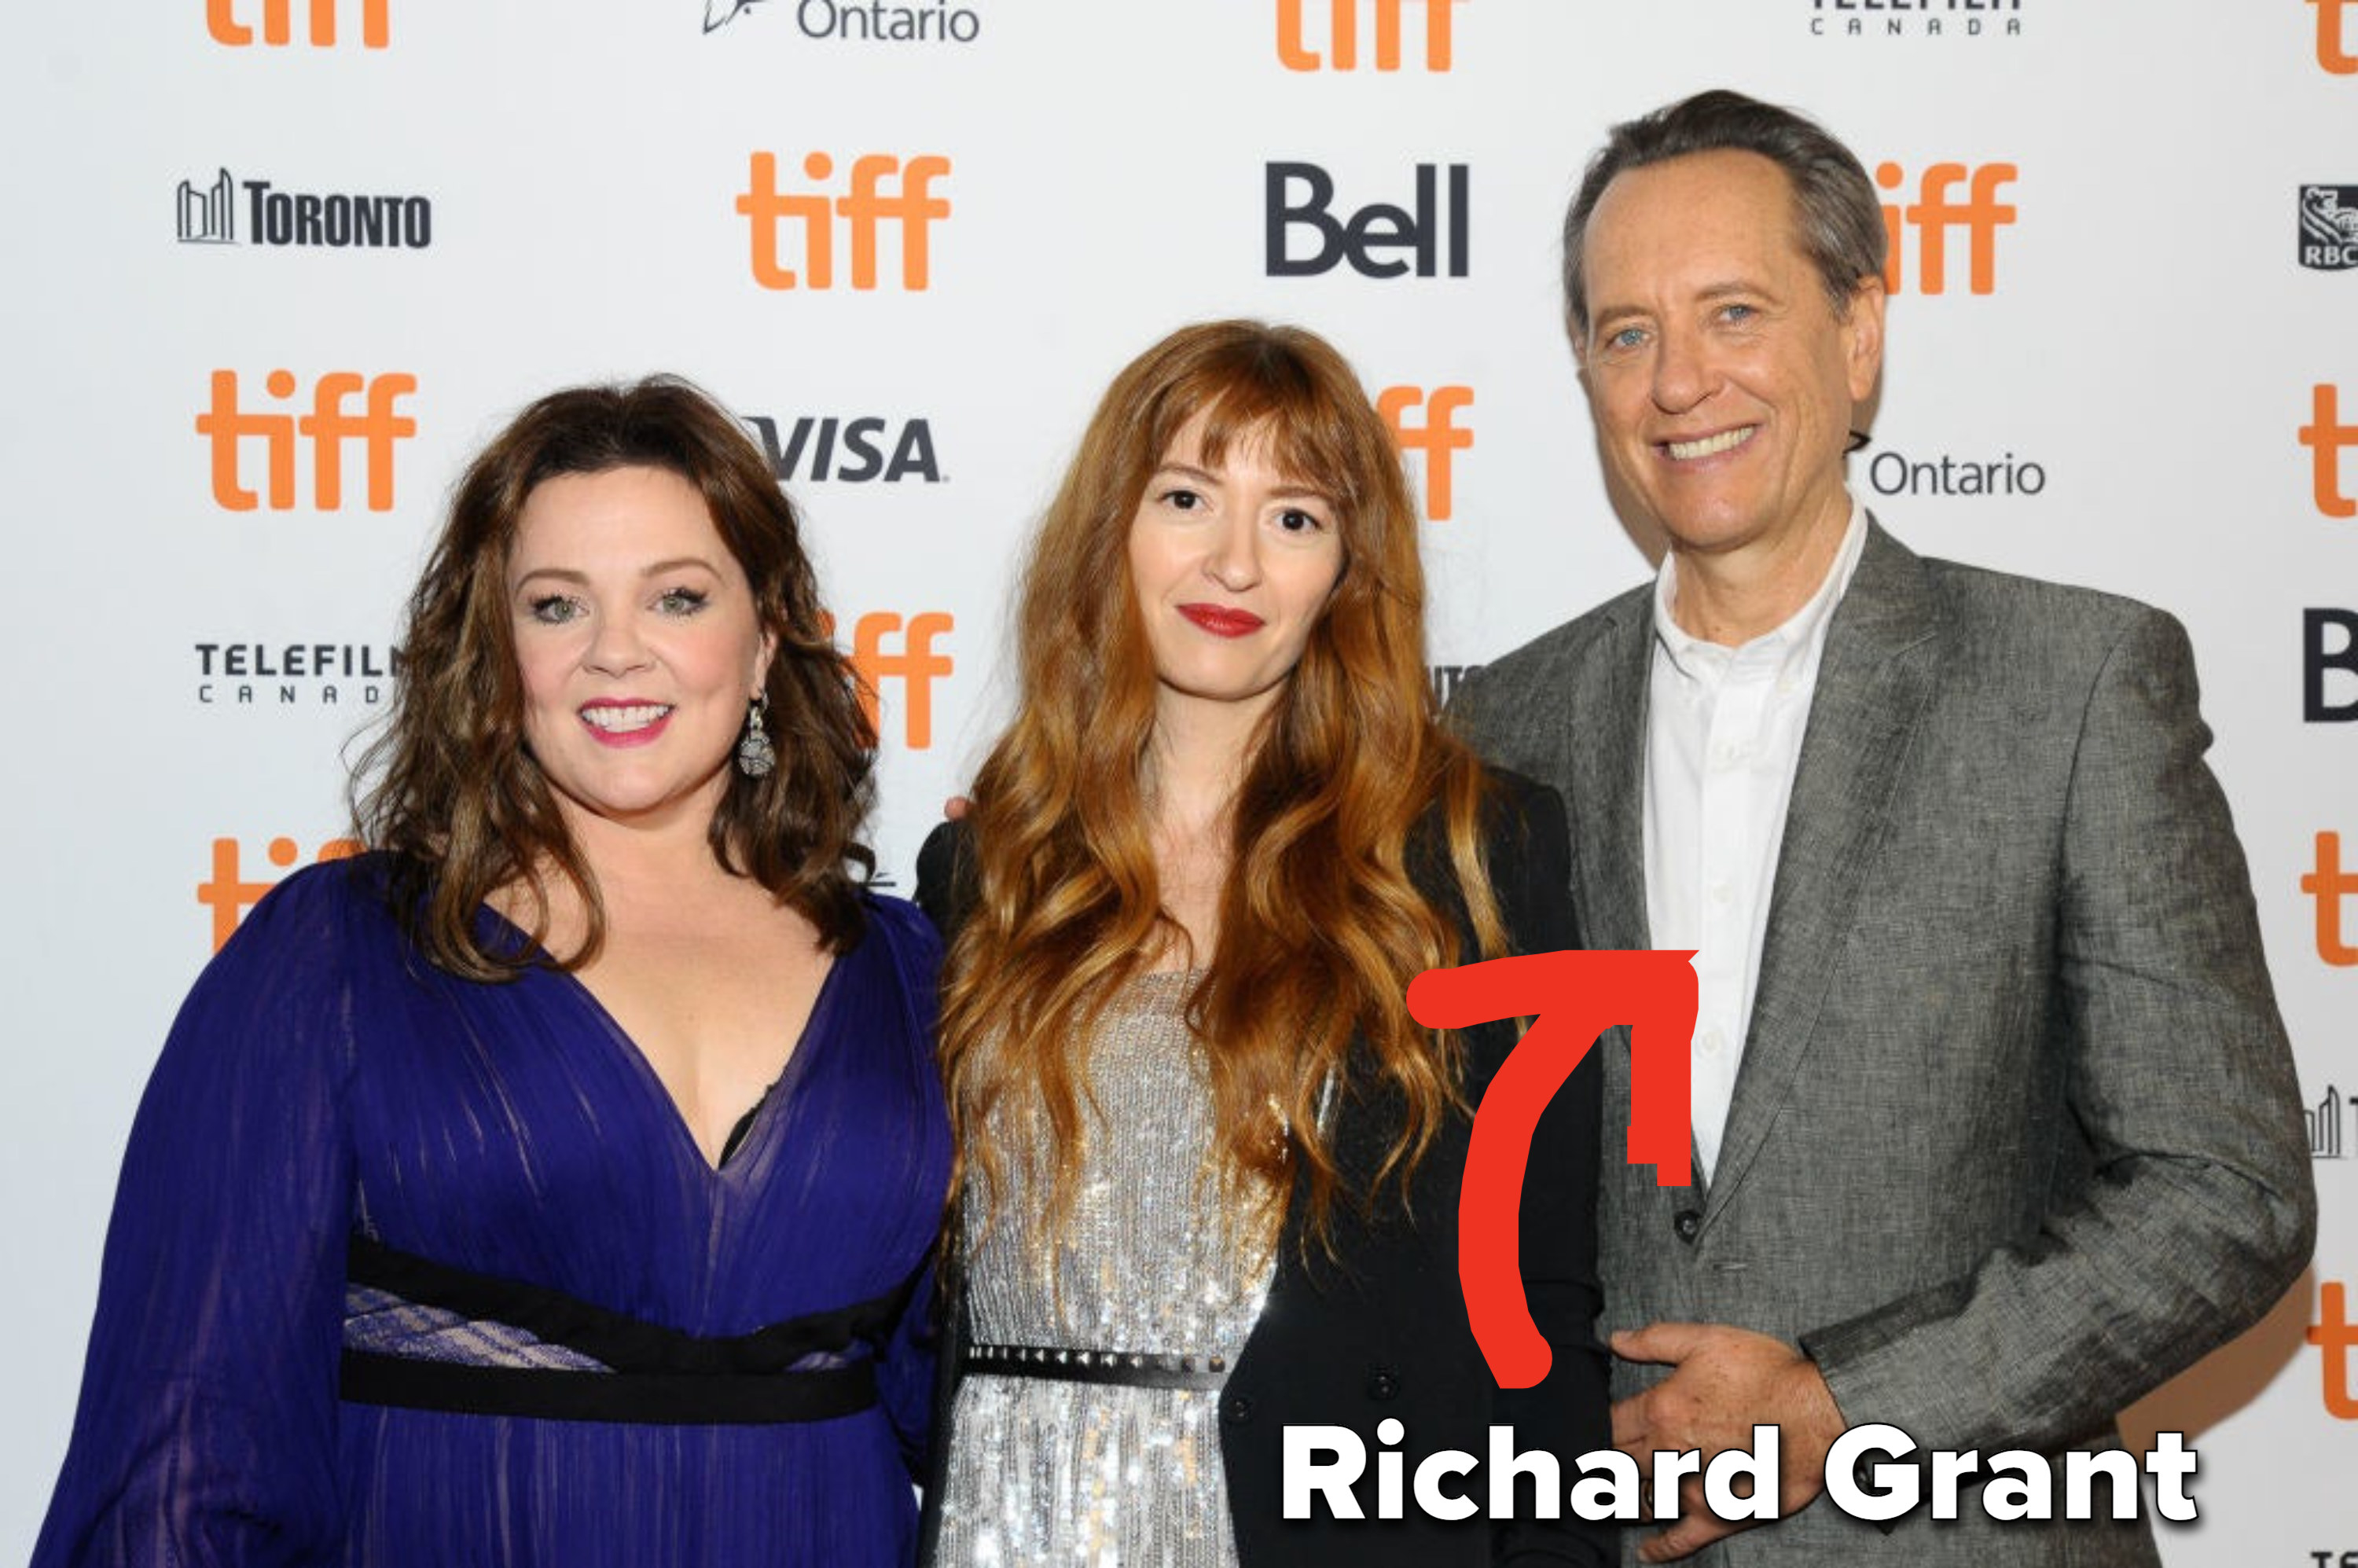 McCarthy with Richard Grant and the director of the final film, Marielle Heller